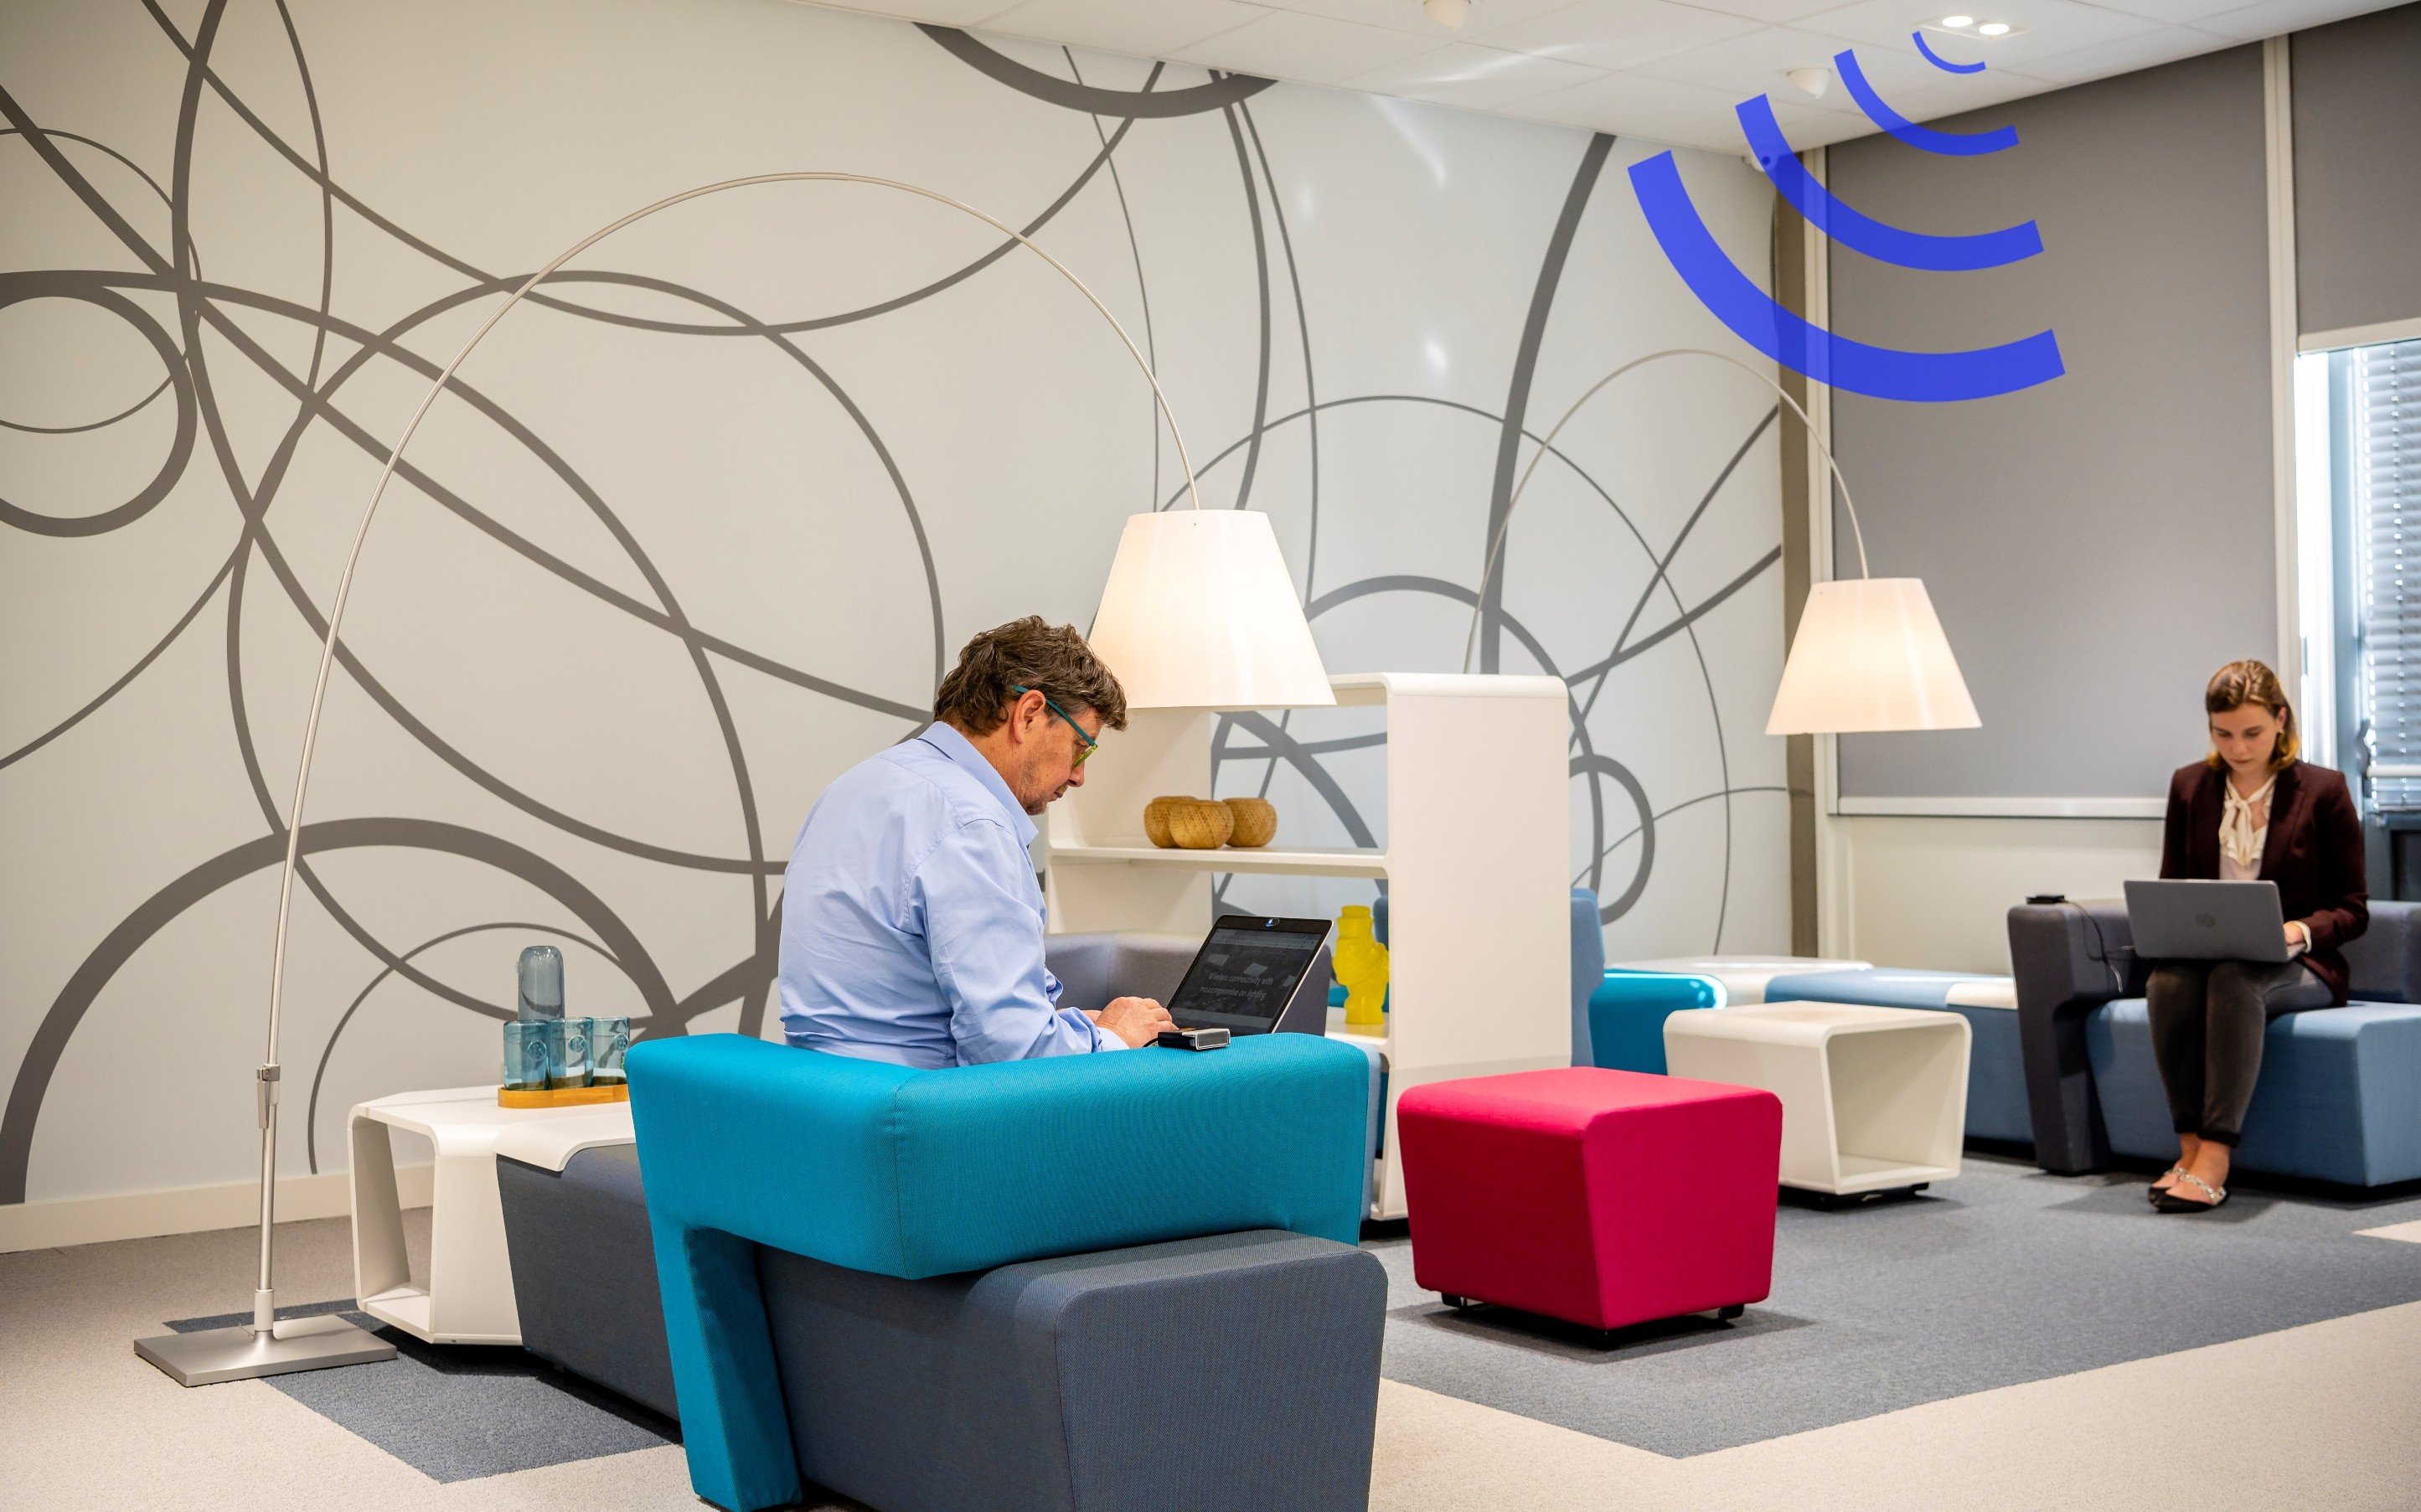 Signify’s commercial Li-fi system is being tested in more than 30 locations across Europe, North America and Asia. Photo: Signify